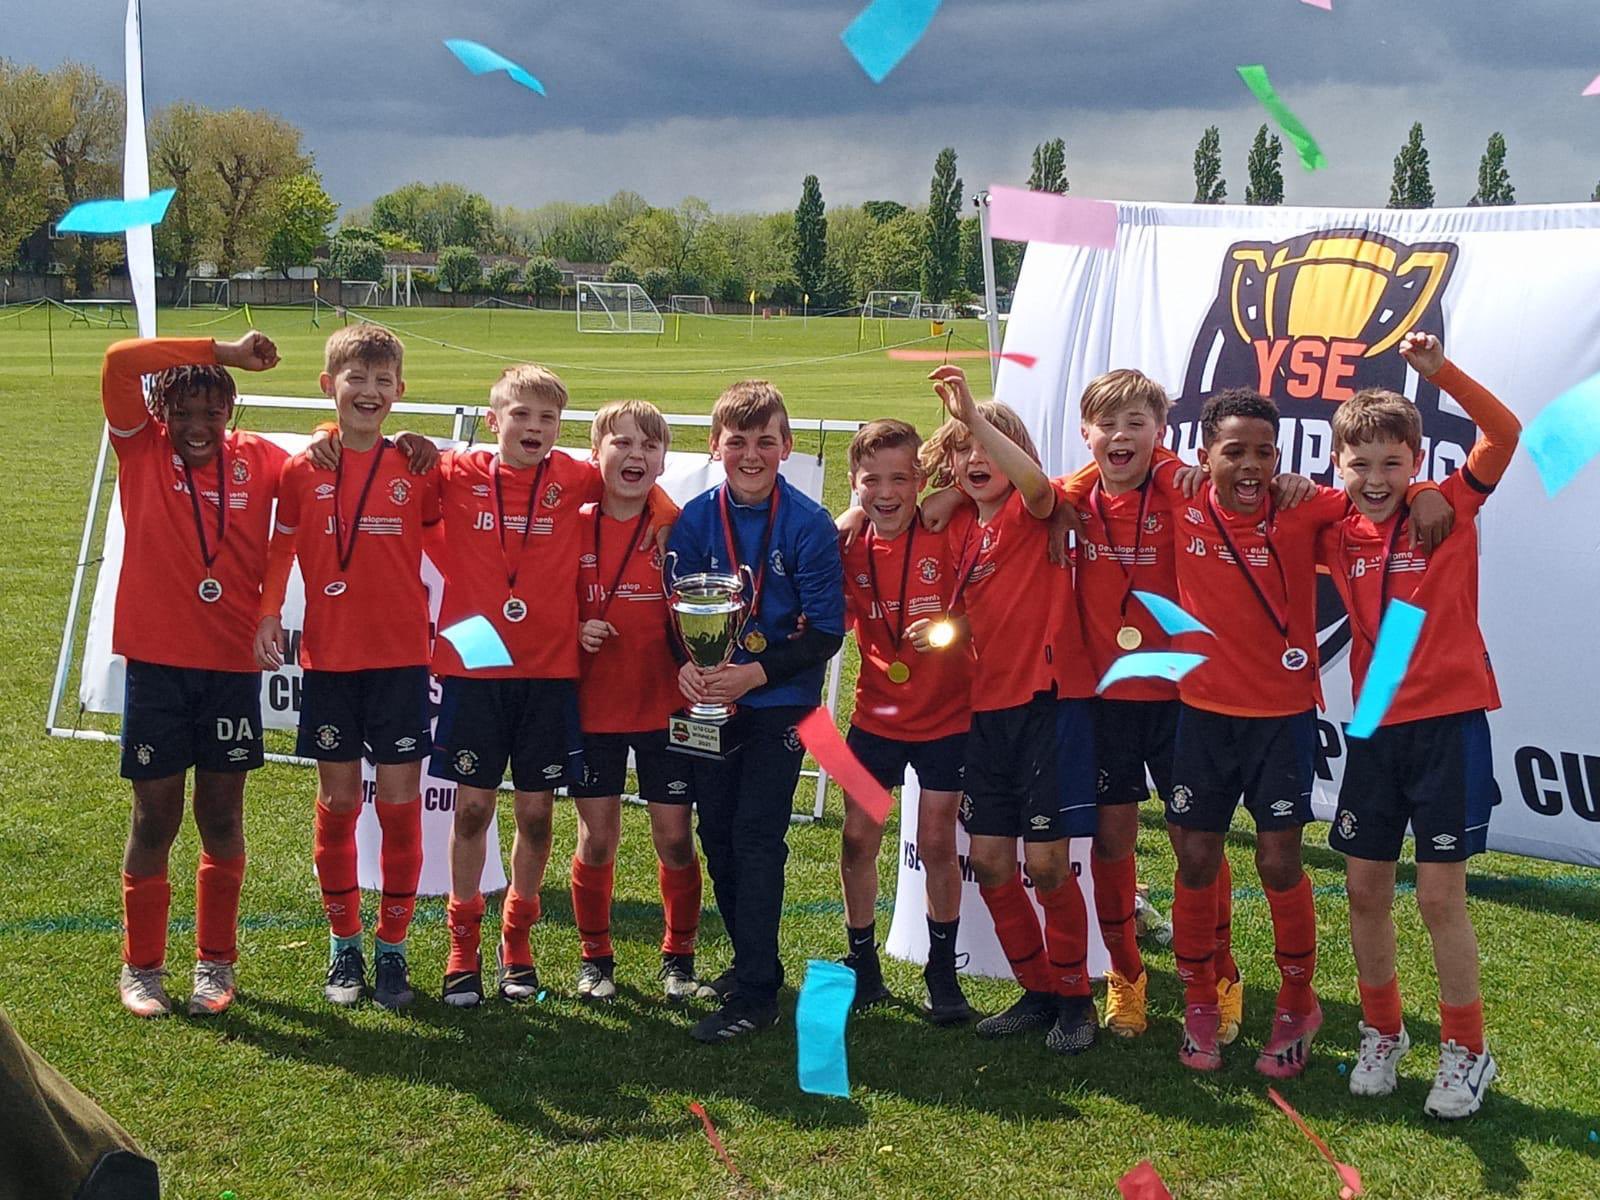 Ltfc Academy Congratulations To The Under 10 S For Winning The Yse Champions Cup Today In Chiswick Played 8 Won 8 And Only Conceded 1 Though Out The Tournament T Co 5gauwl8zn6